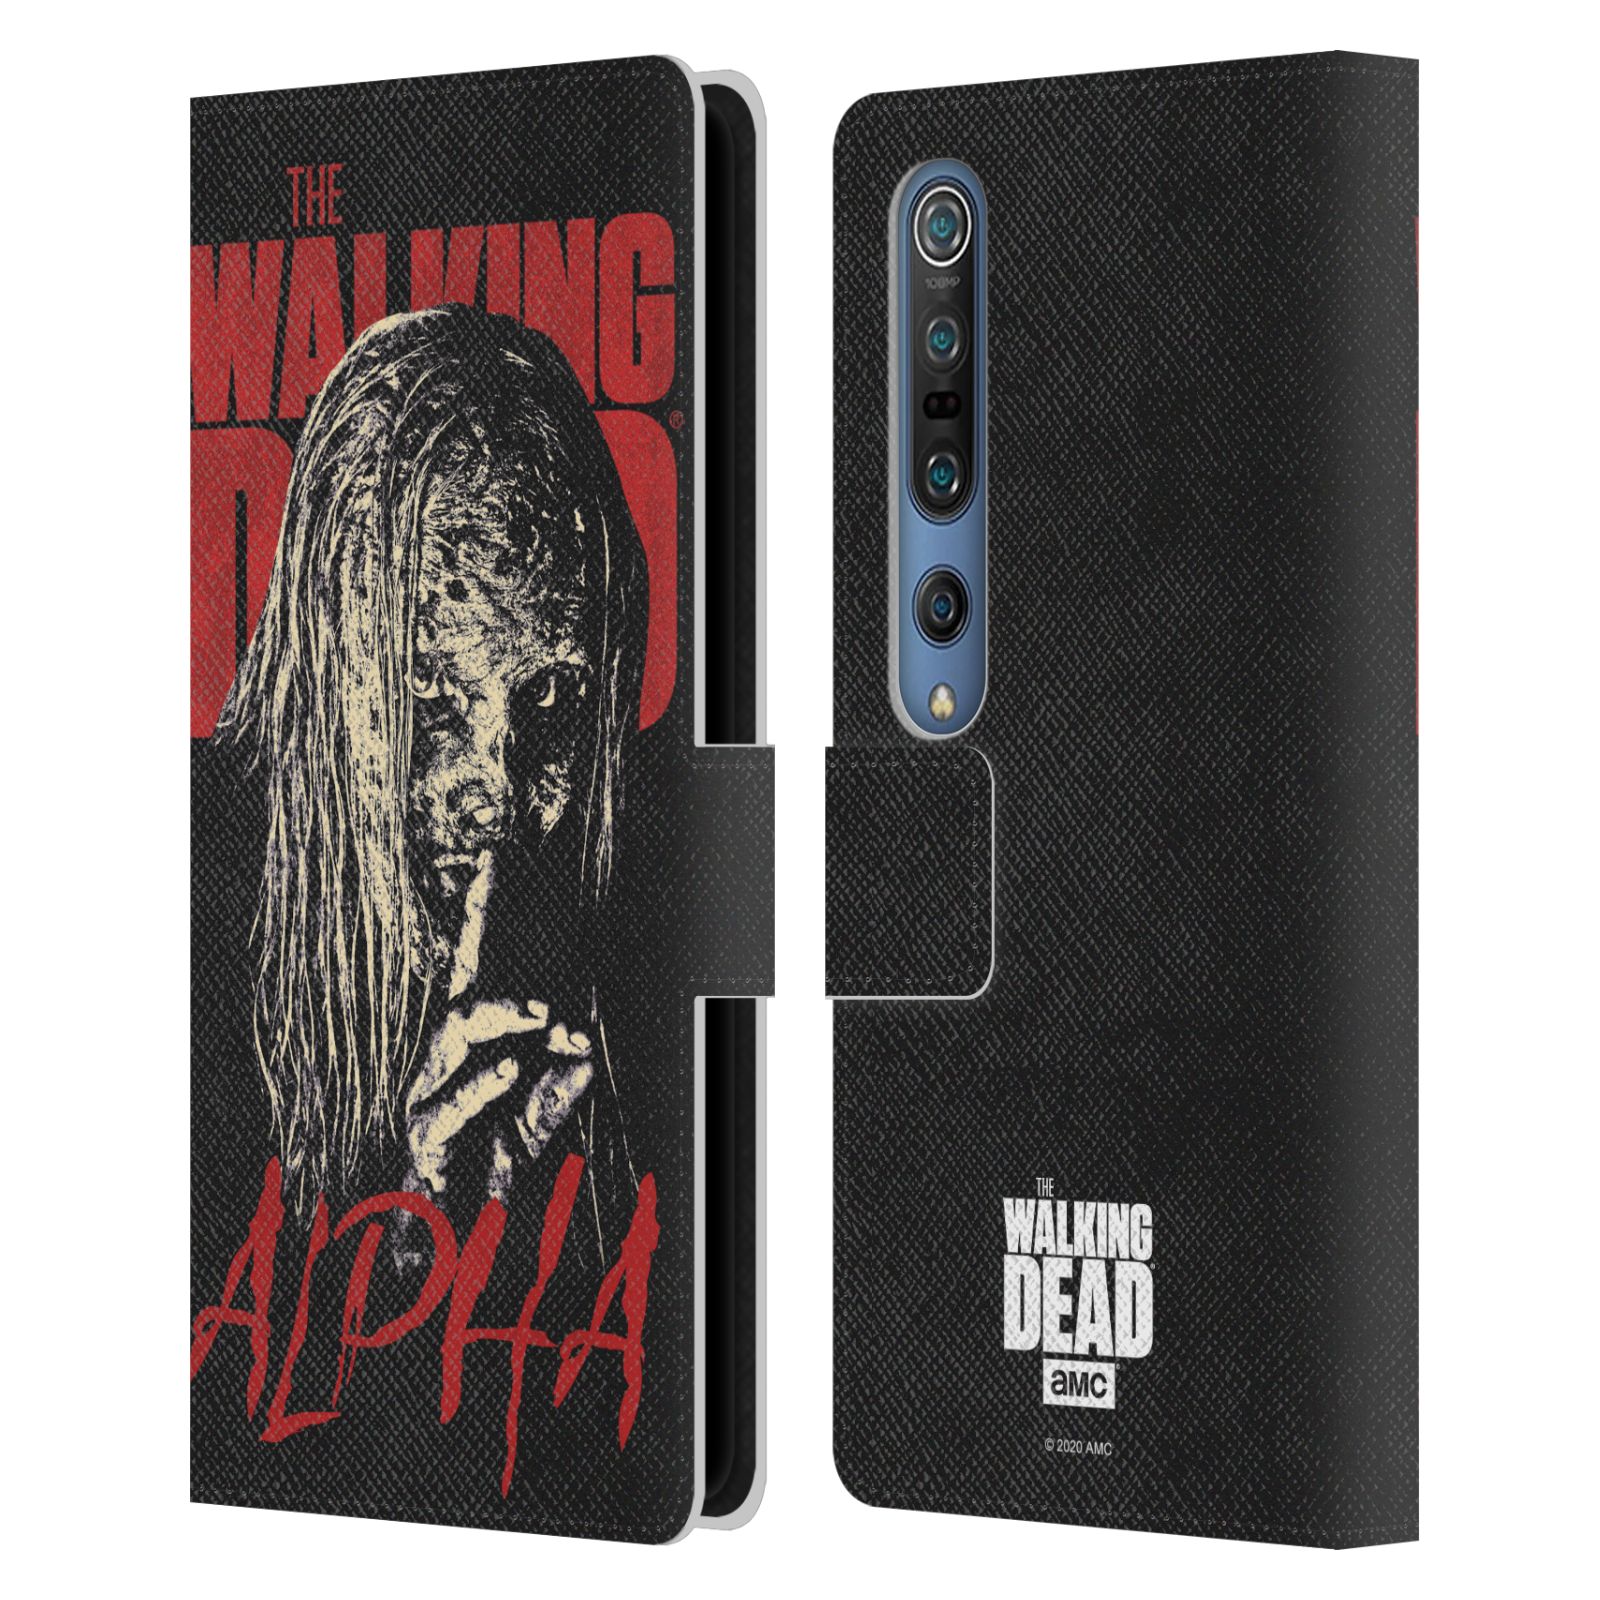 THE WALKING DEAD SEASON 10 CHARACTER PORTRAITS LEATHER BOOK CASE XIAOMI PHONES